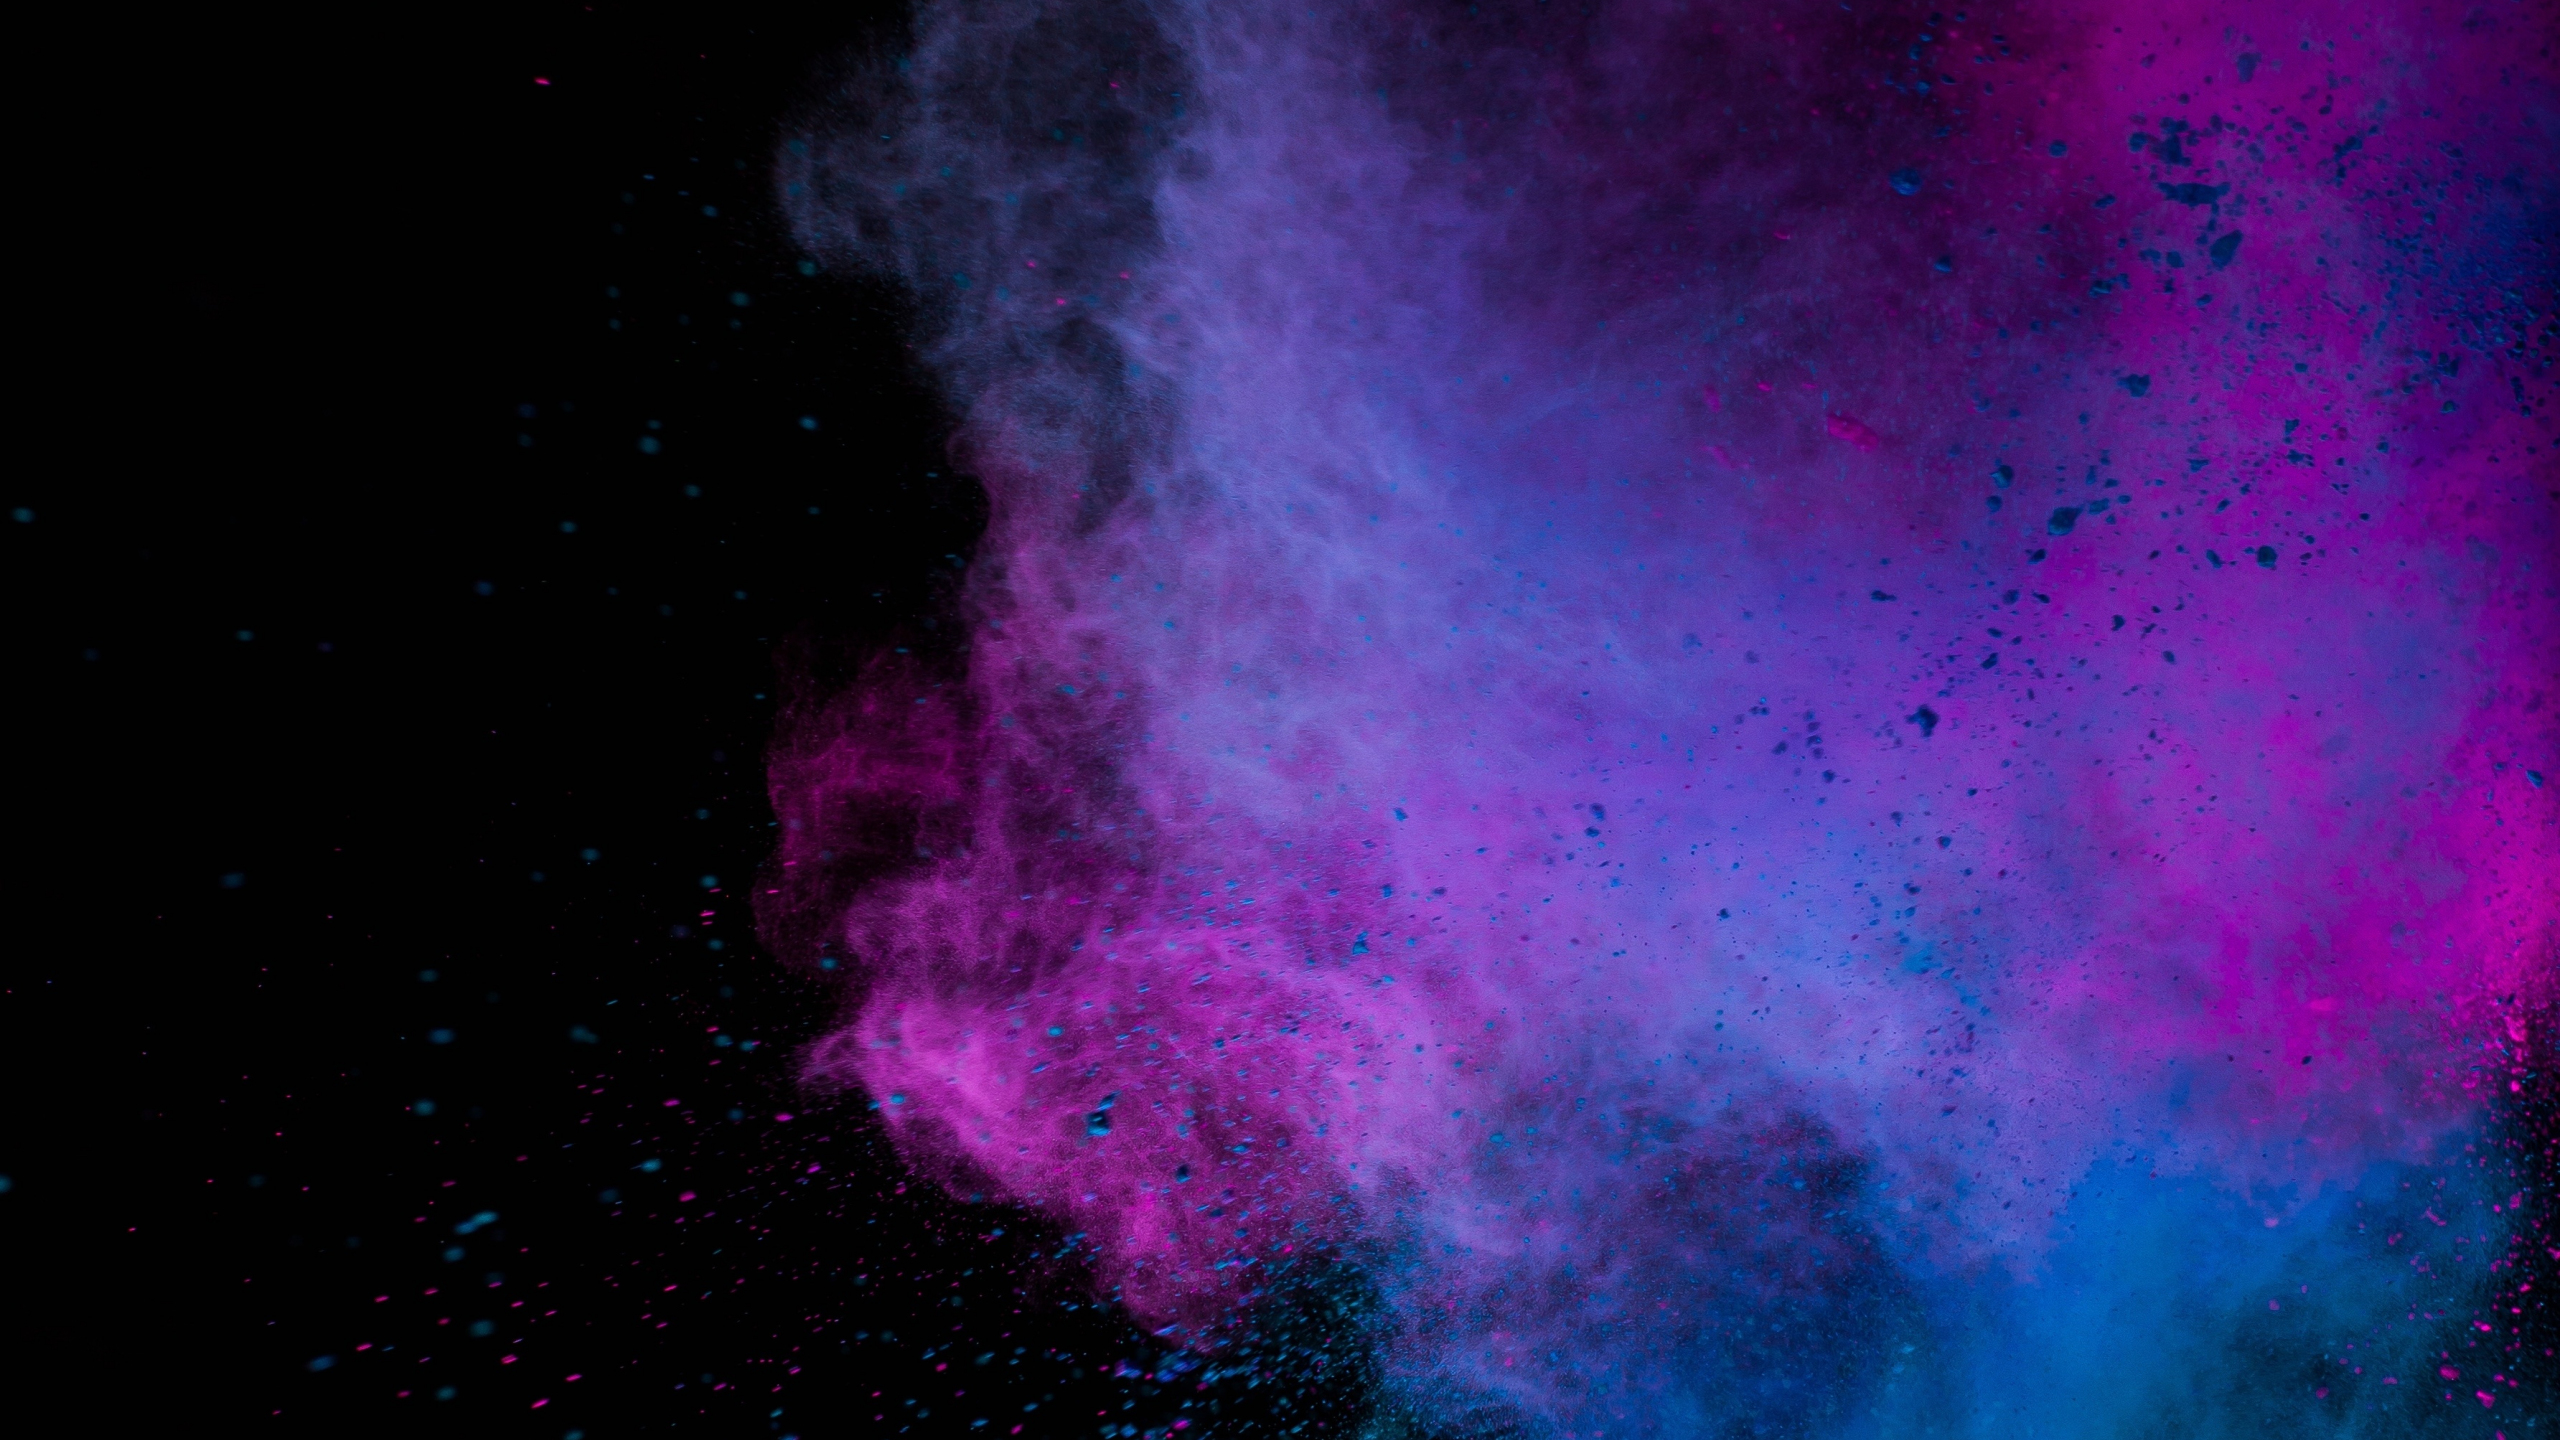 Download wallpaper 2560x1440 dusk, powder, paint, holi, multicolored, dual  wide 16:9 2560x1440 hd background, 20608